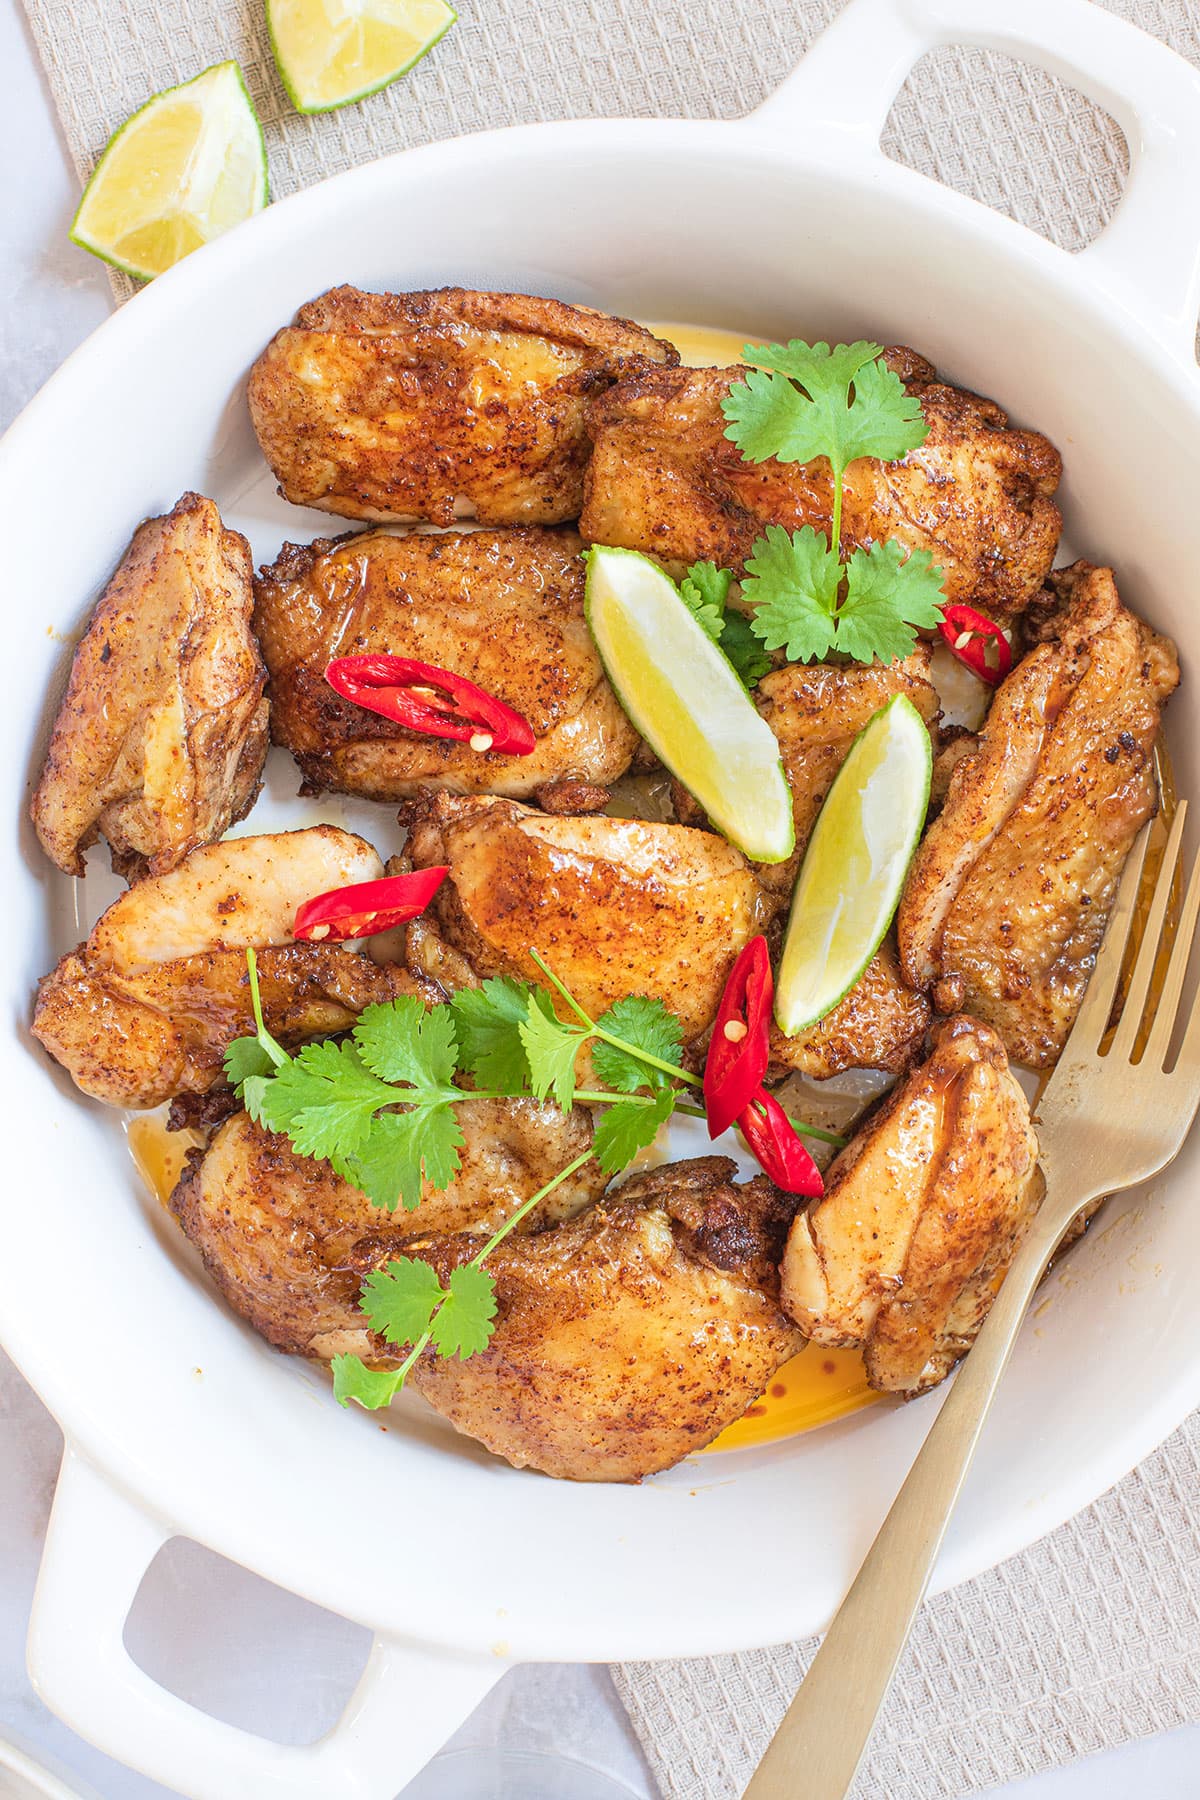 Pan-fried Asian Five-Spice Chicken in a plate.